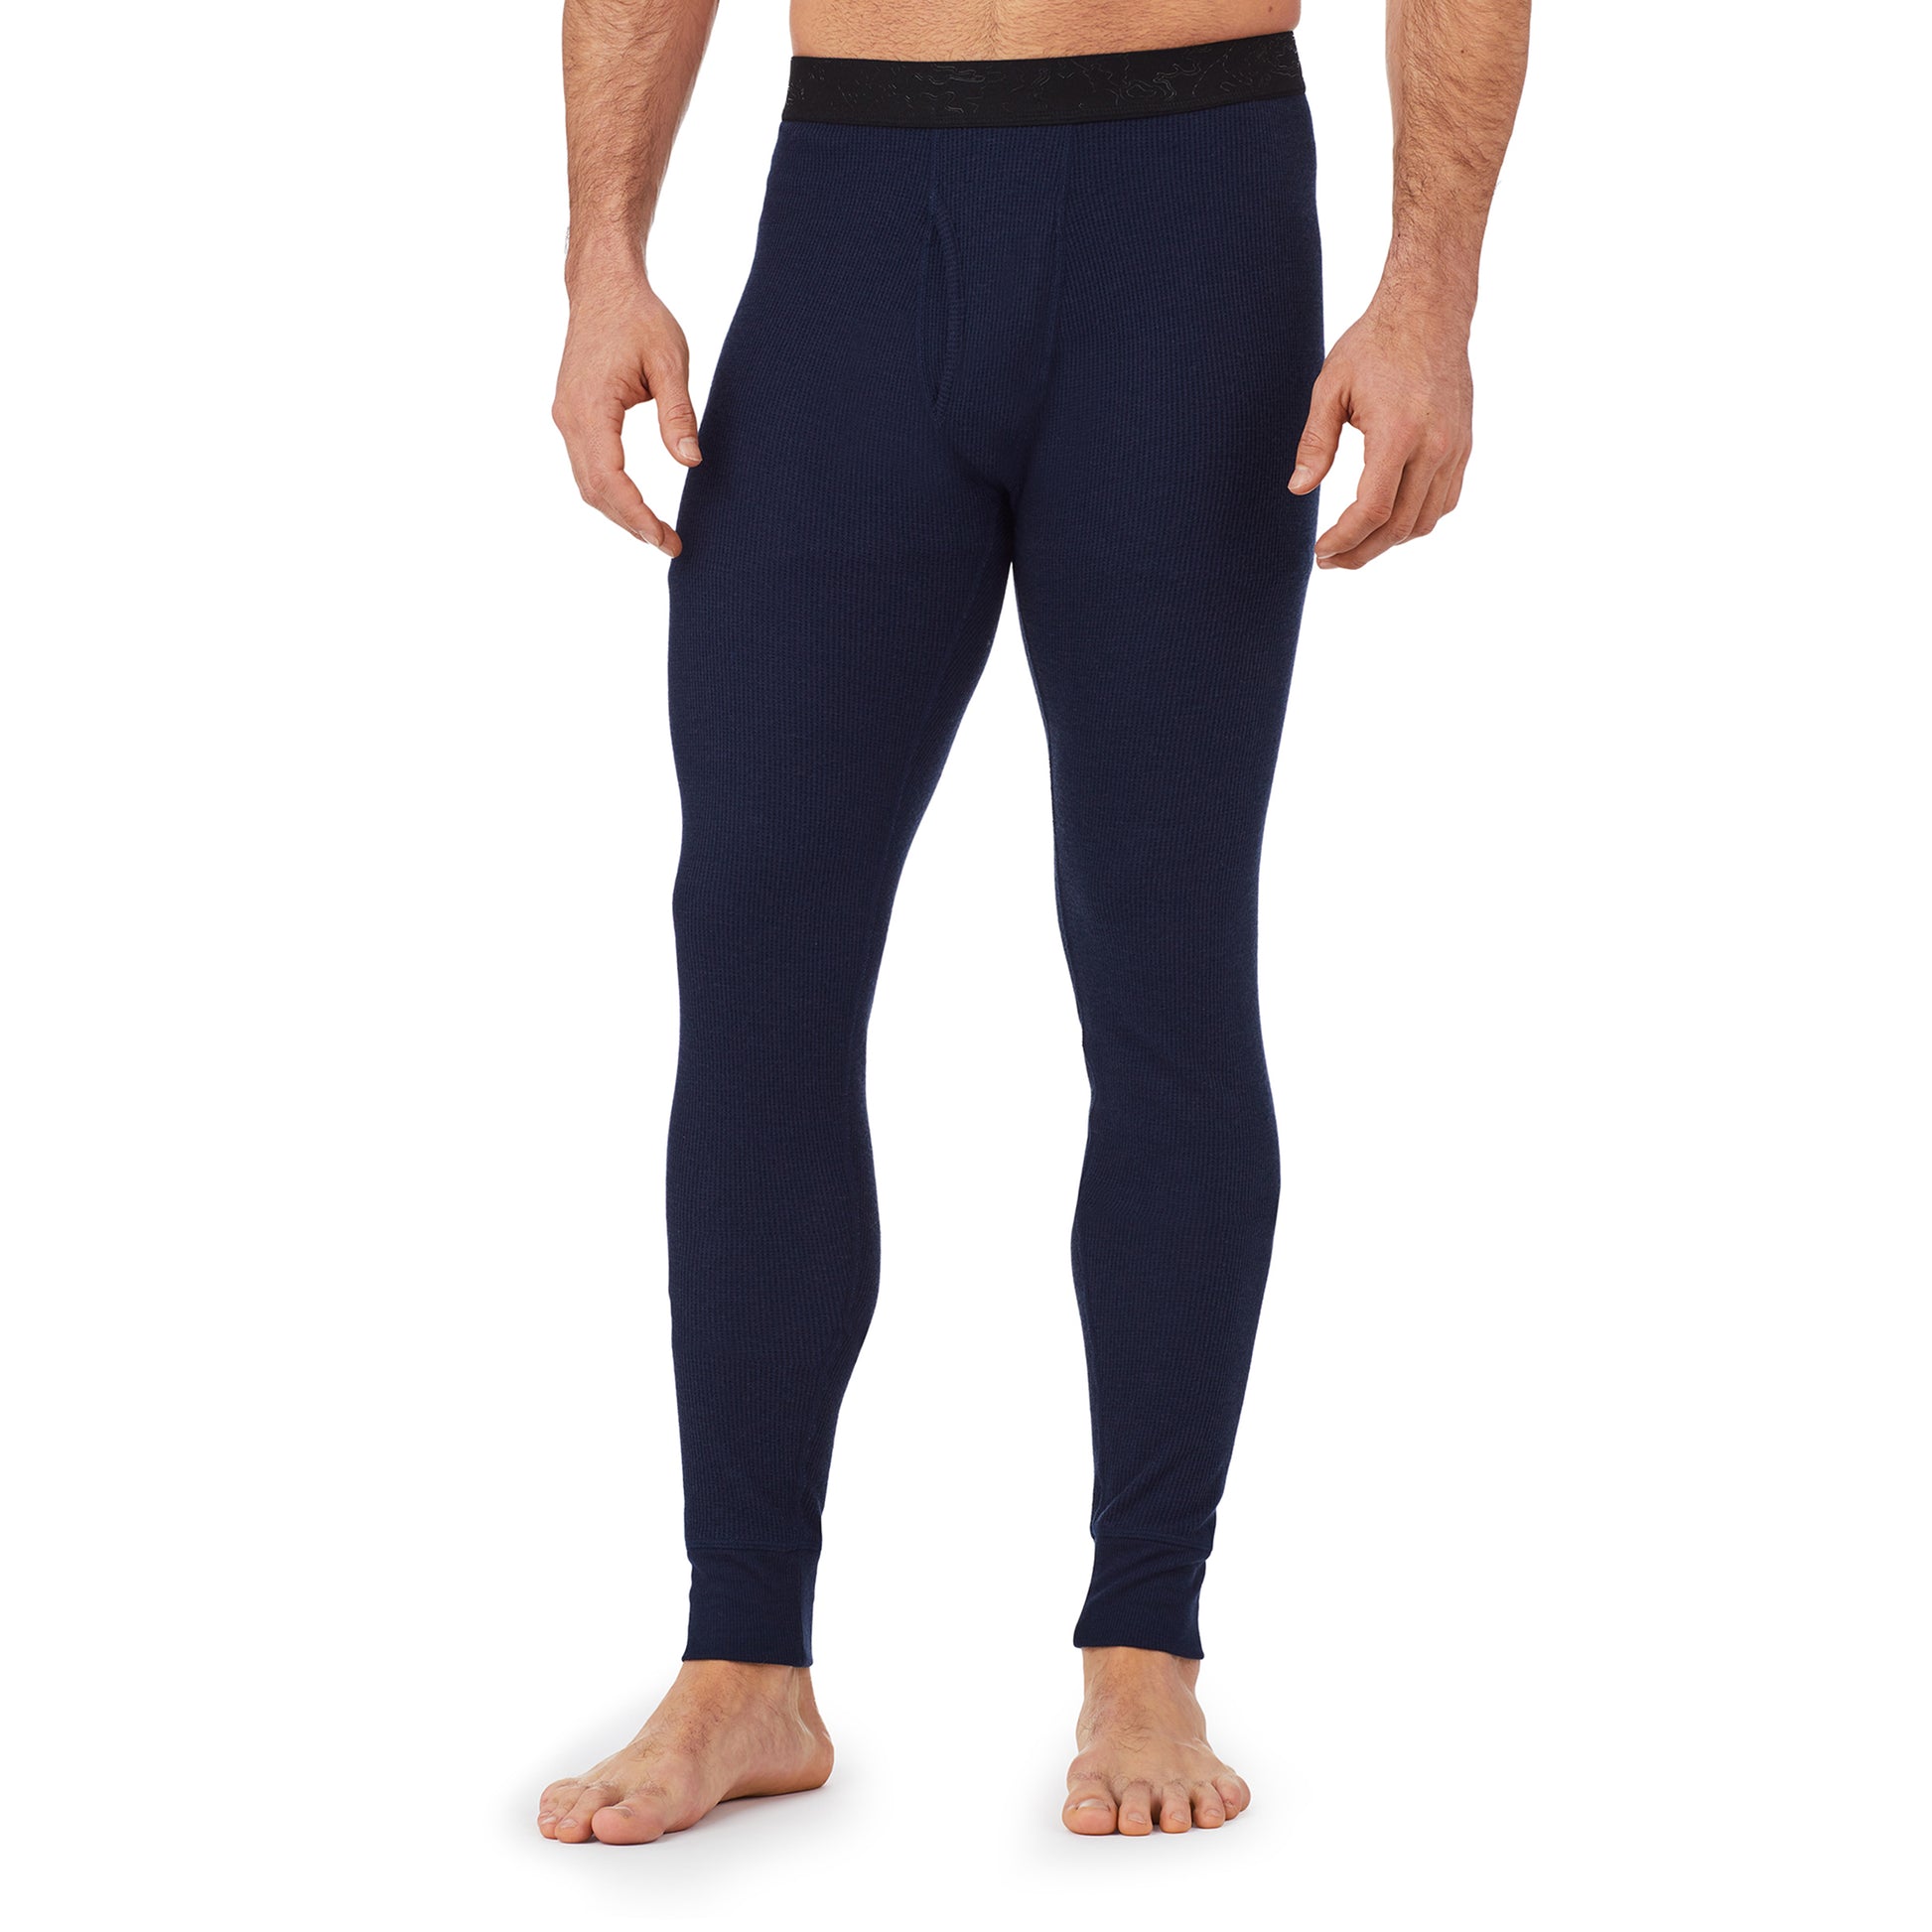 Navy; Model is wearing size M. He is 6'1", Waist 31", Inseam 33". @A man wearing a navy waffle thermal pant.